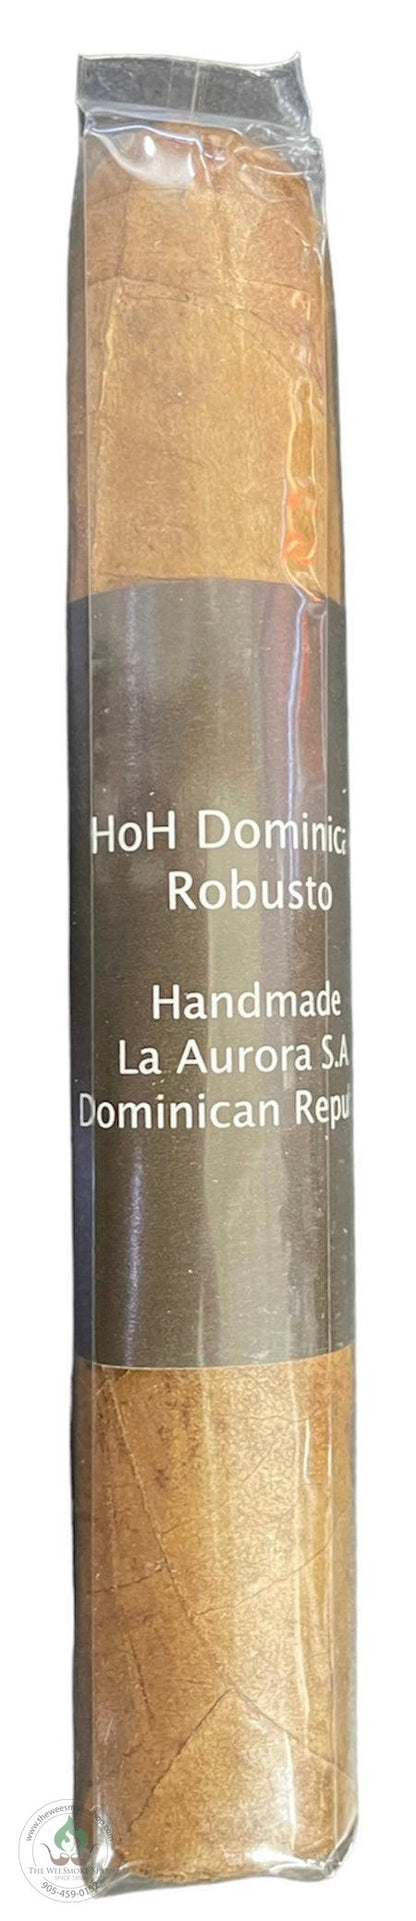 HoH - Dominican Robusto - The Wee Smoke Shop